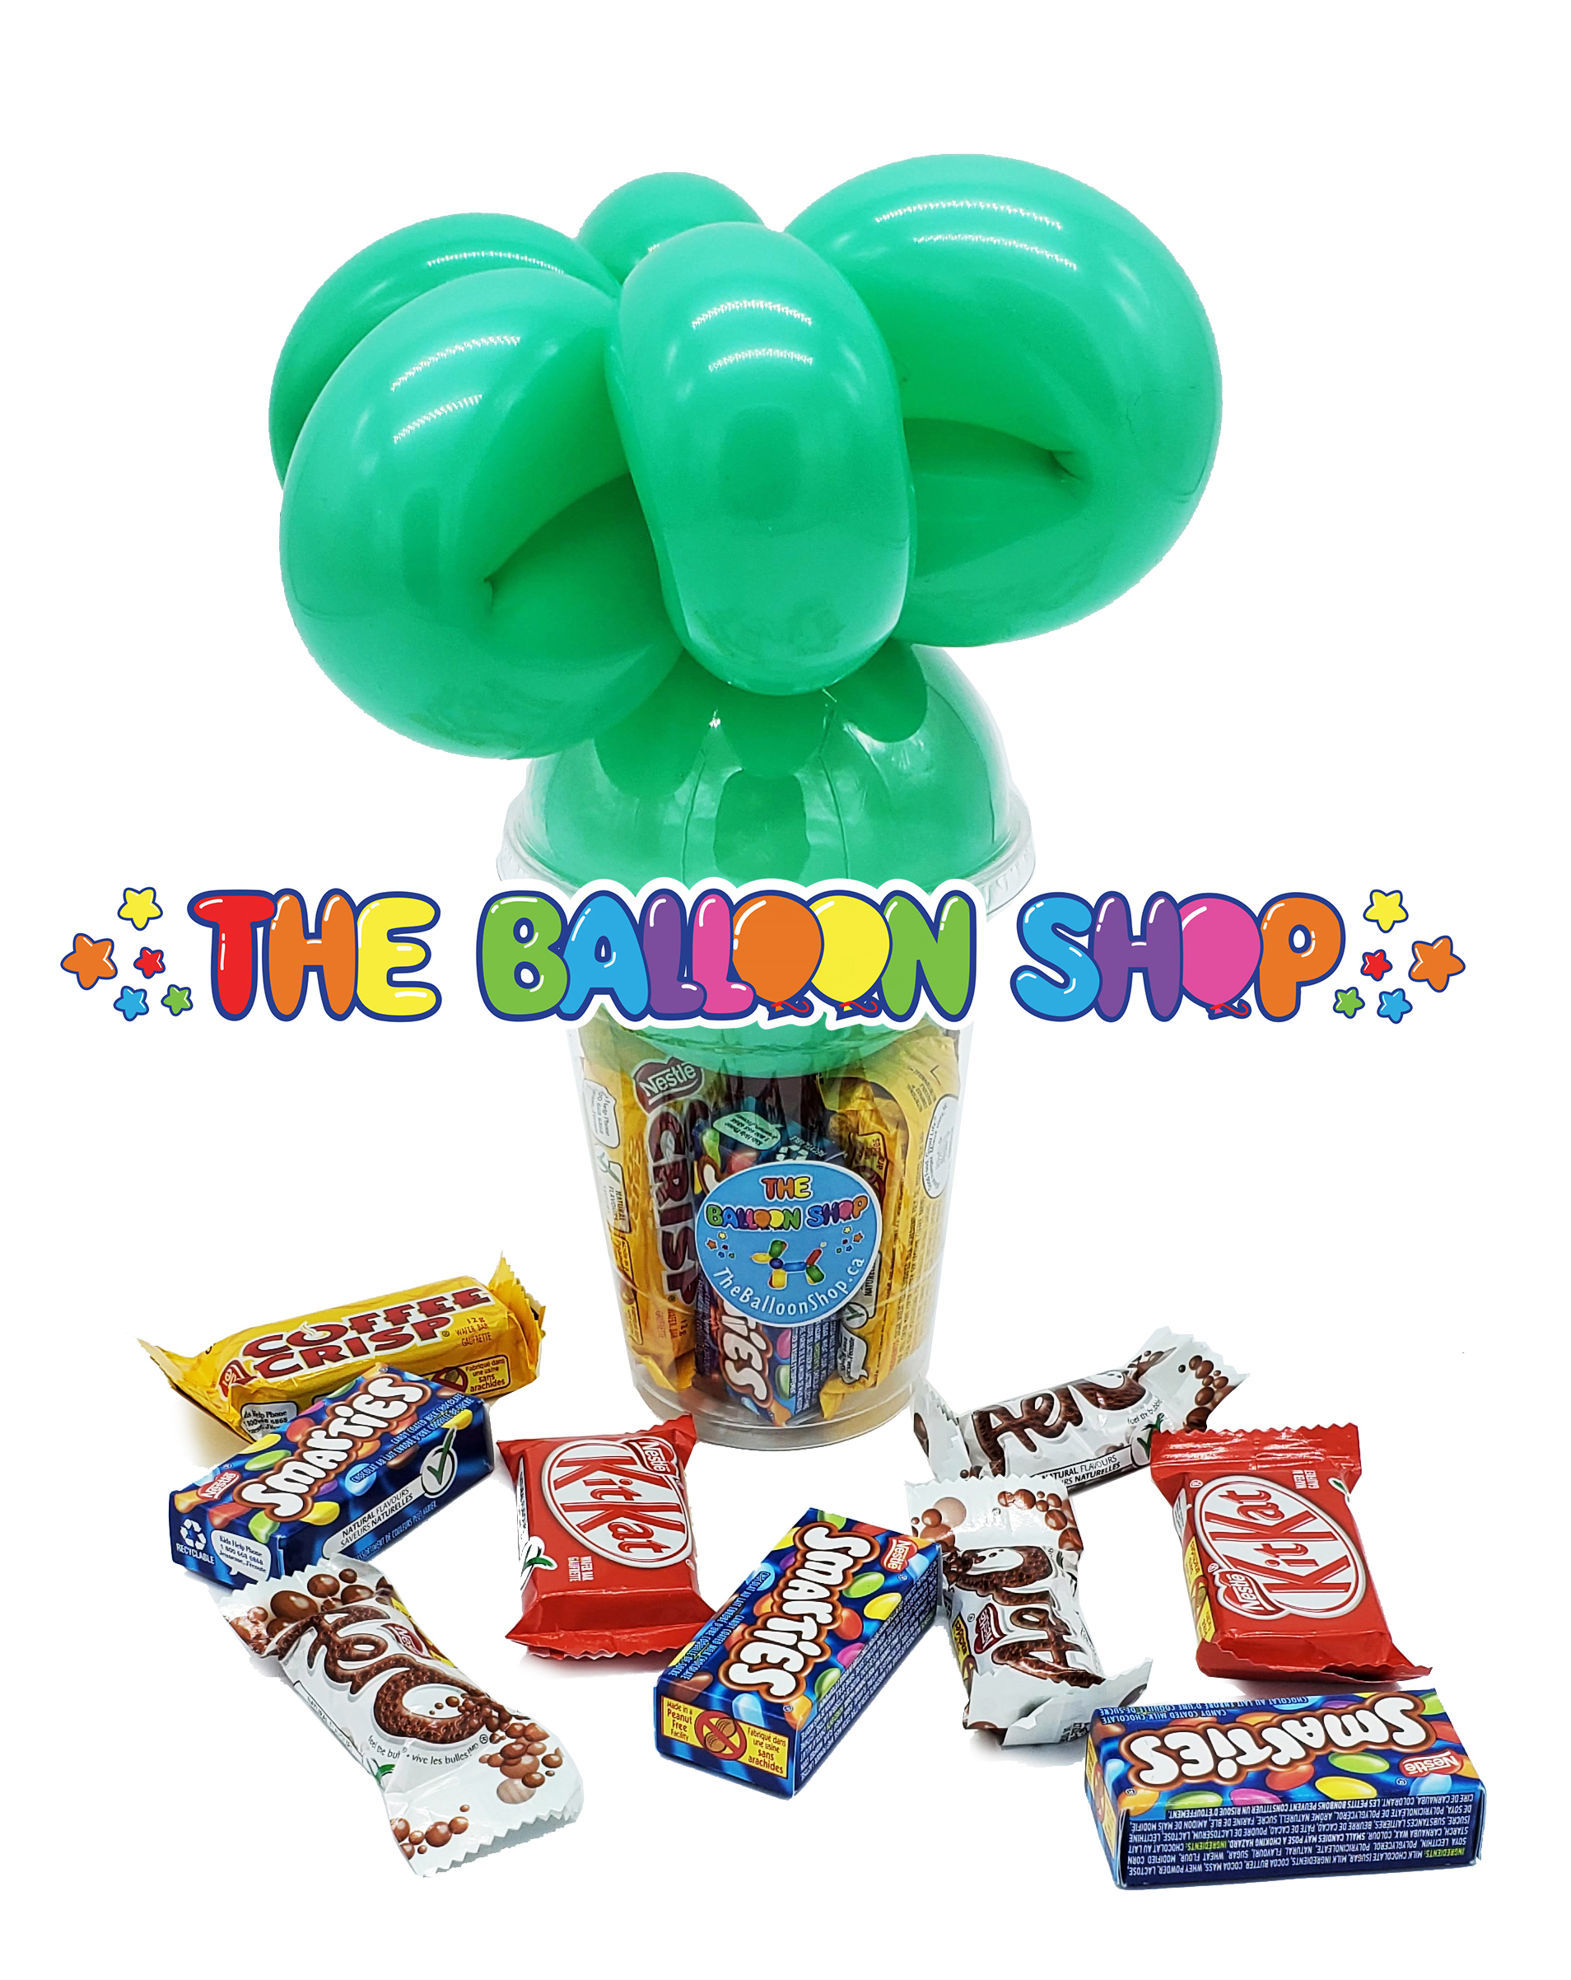 Picture of Turtle - Balloon Candy Cup